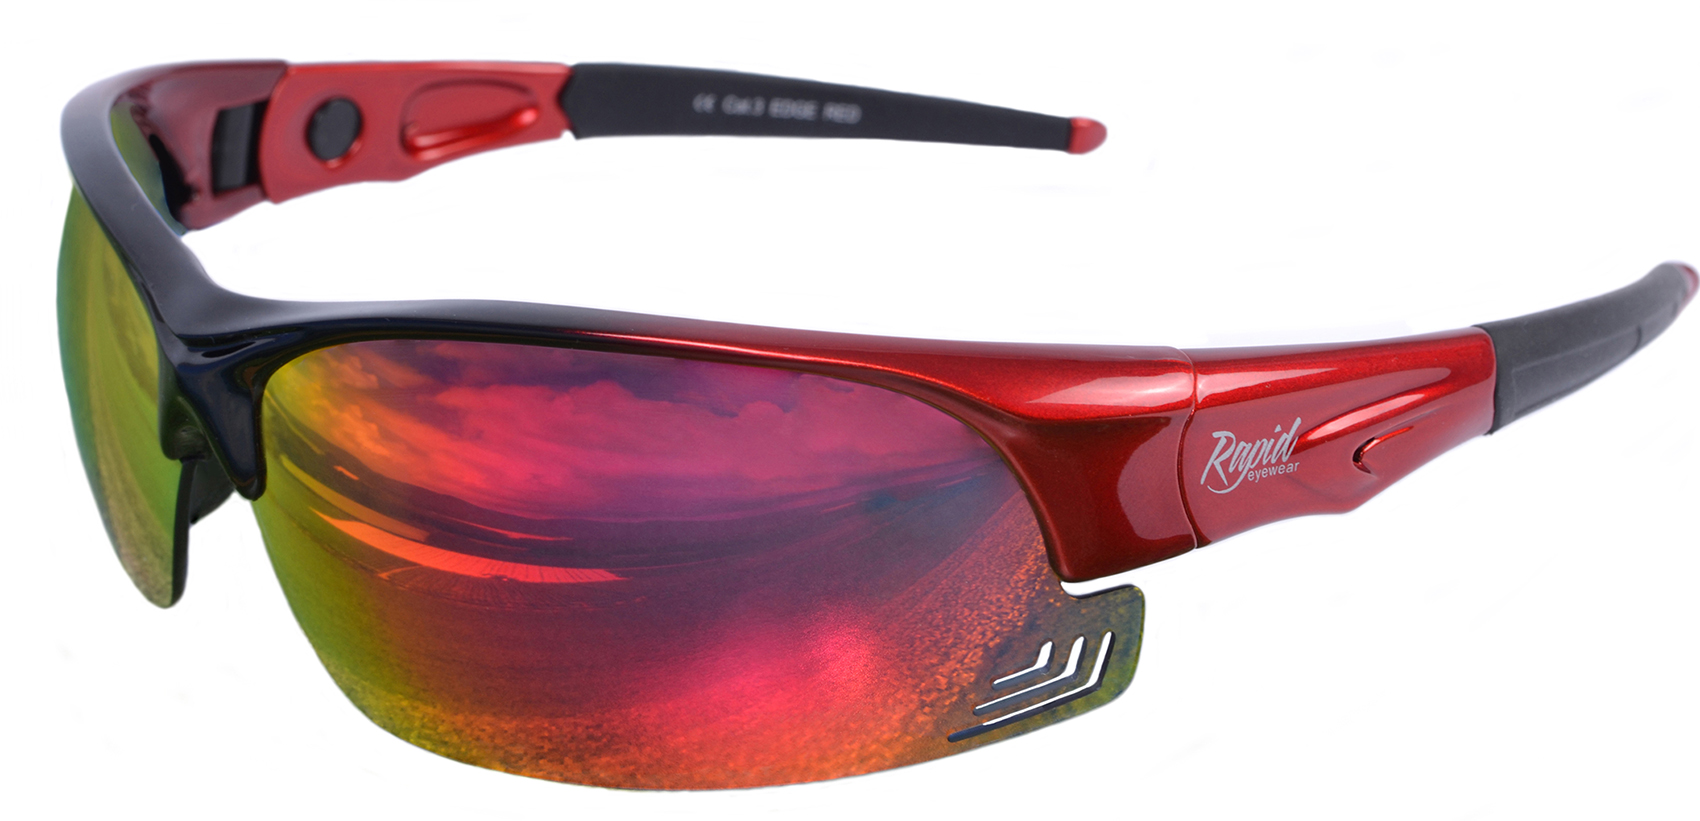 Red sunglasses for skiiers with mirrored lenses